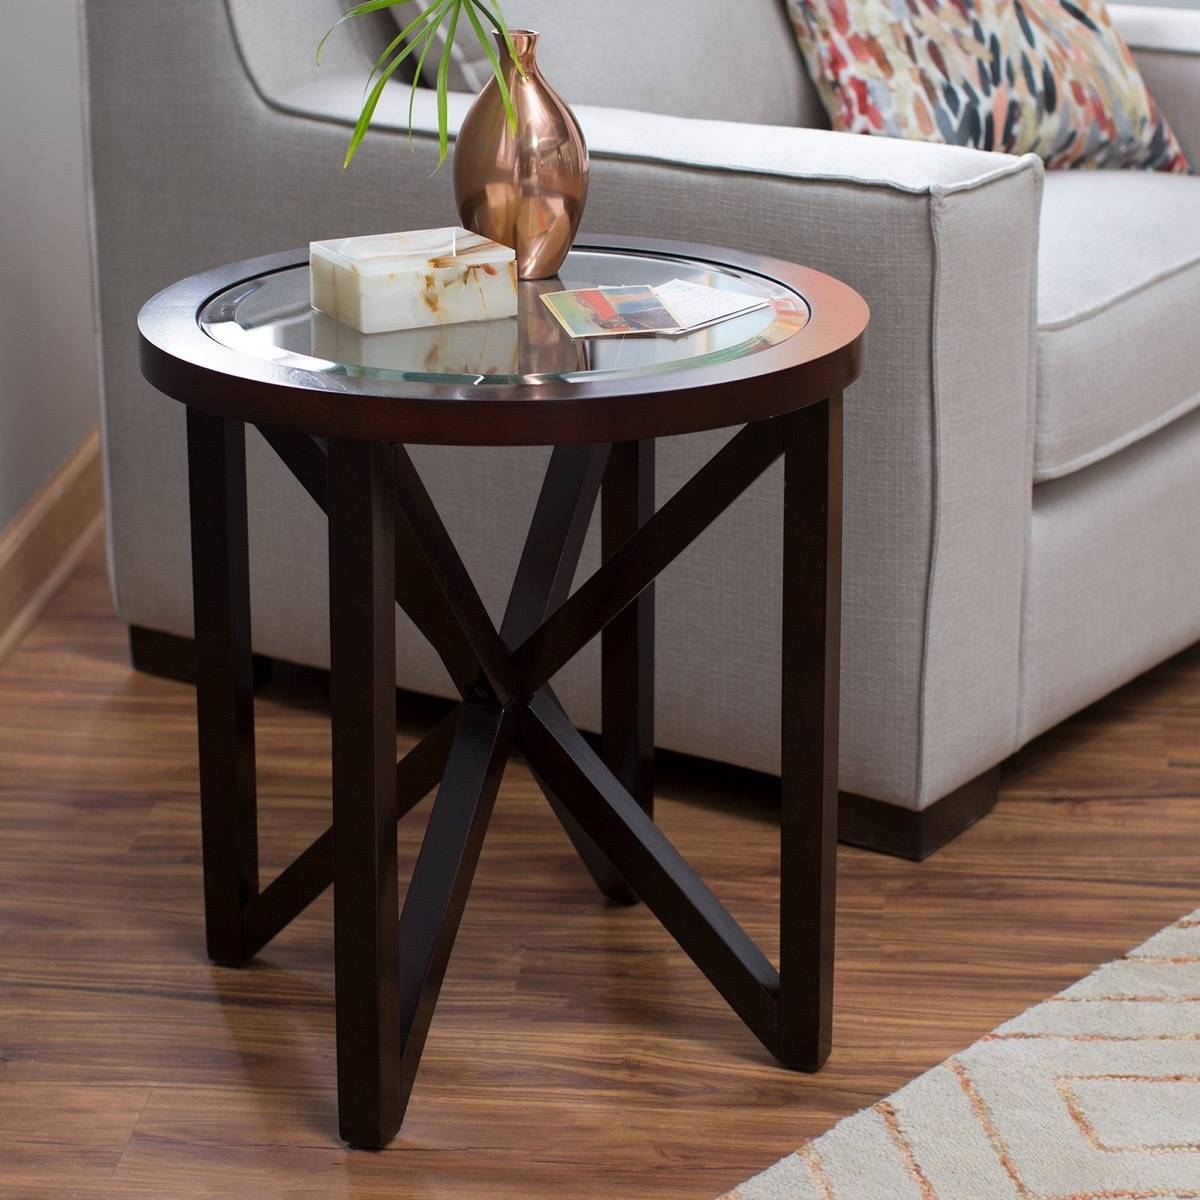 Webster round end table from Hayneedle